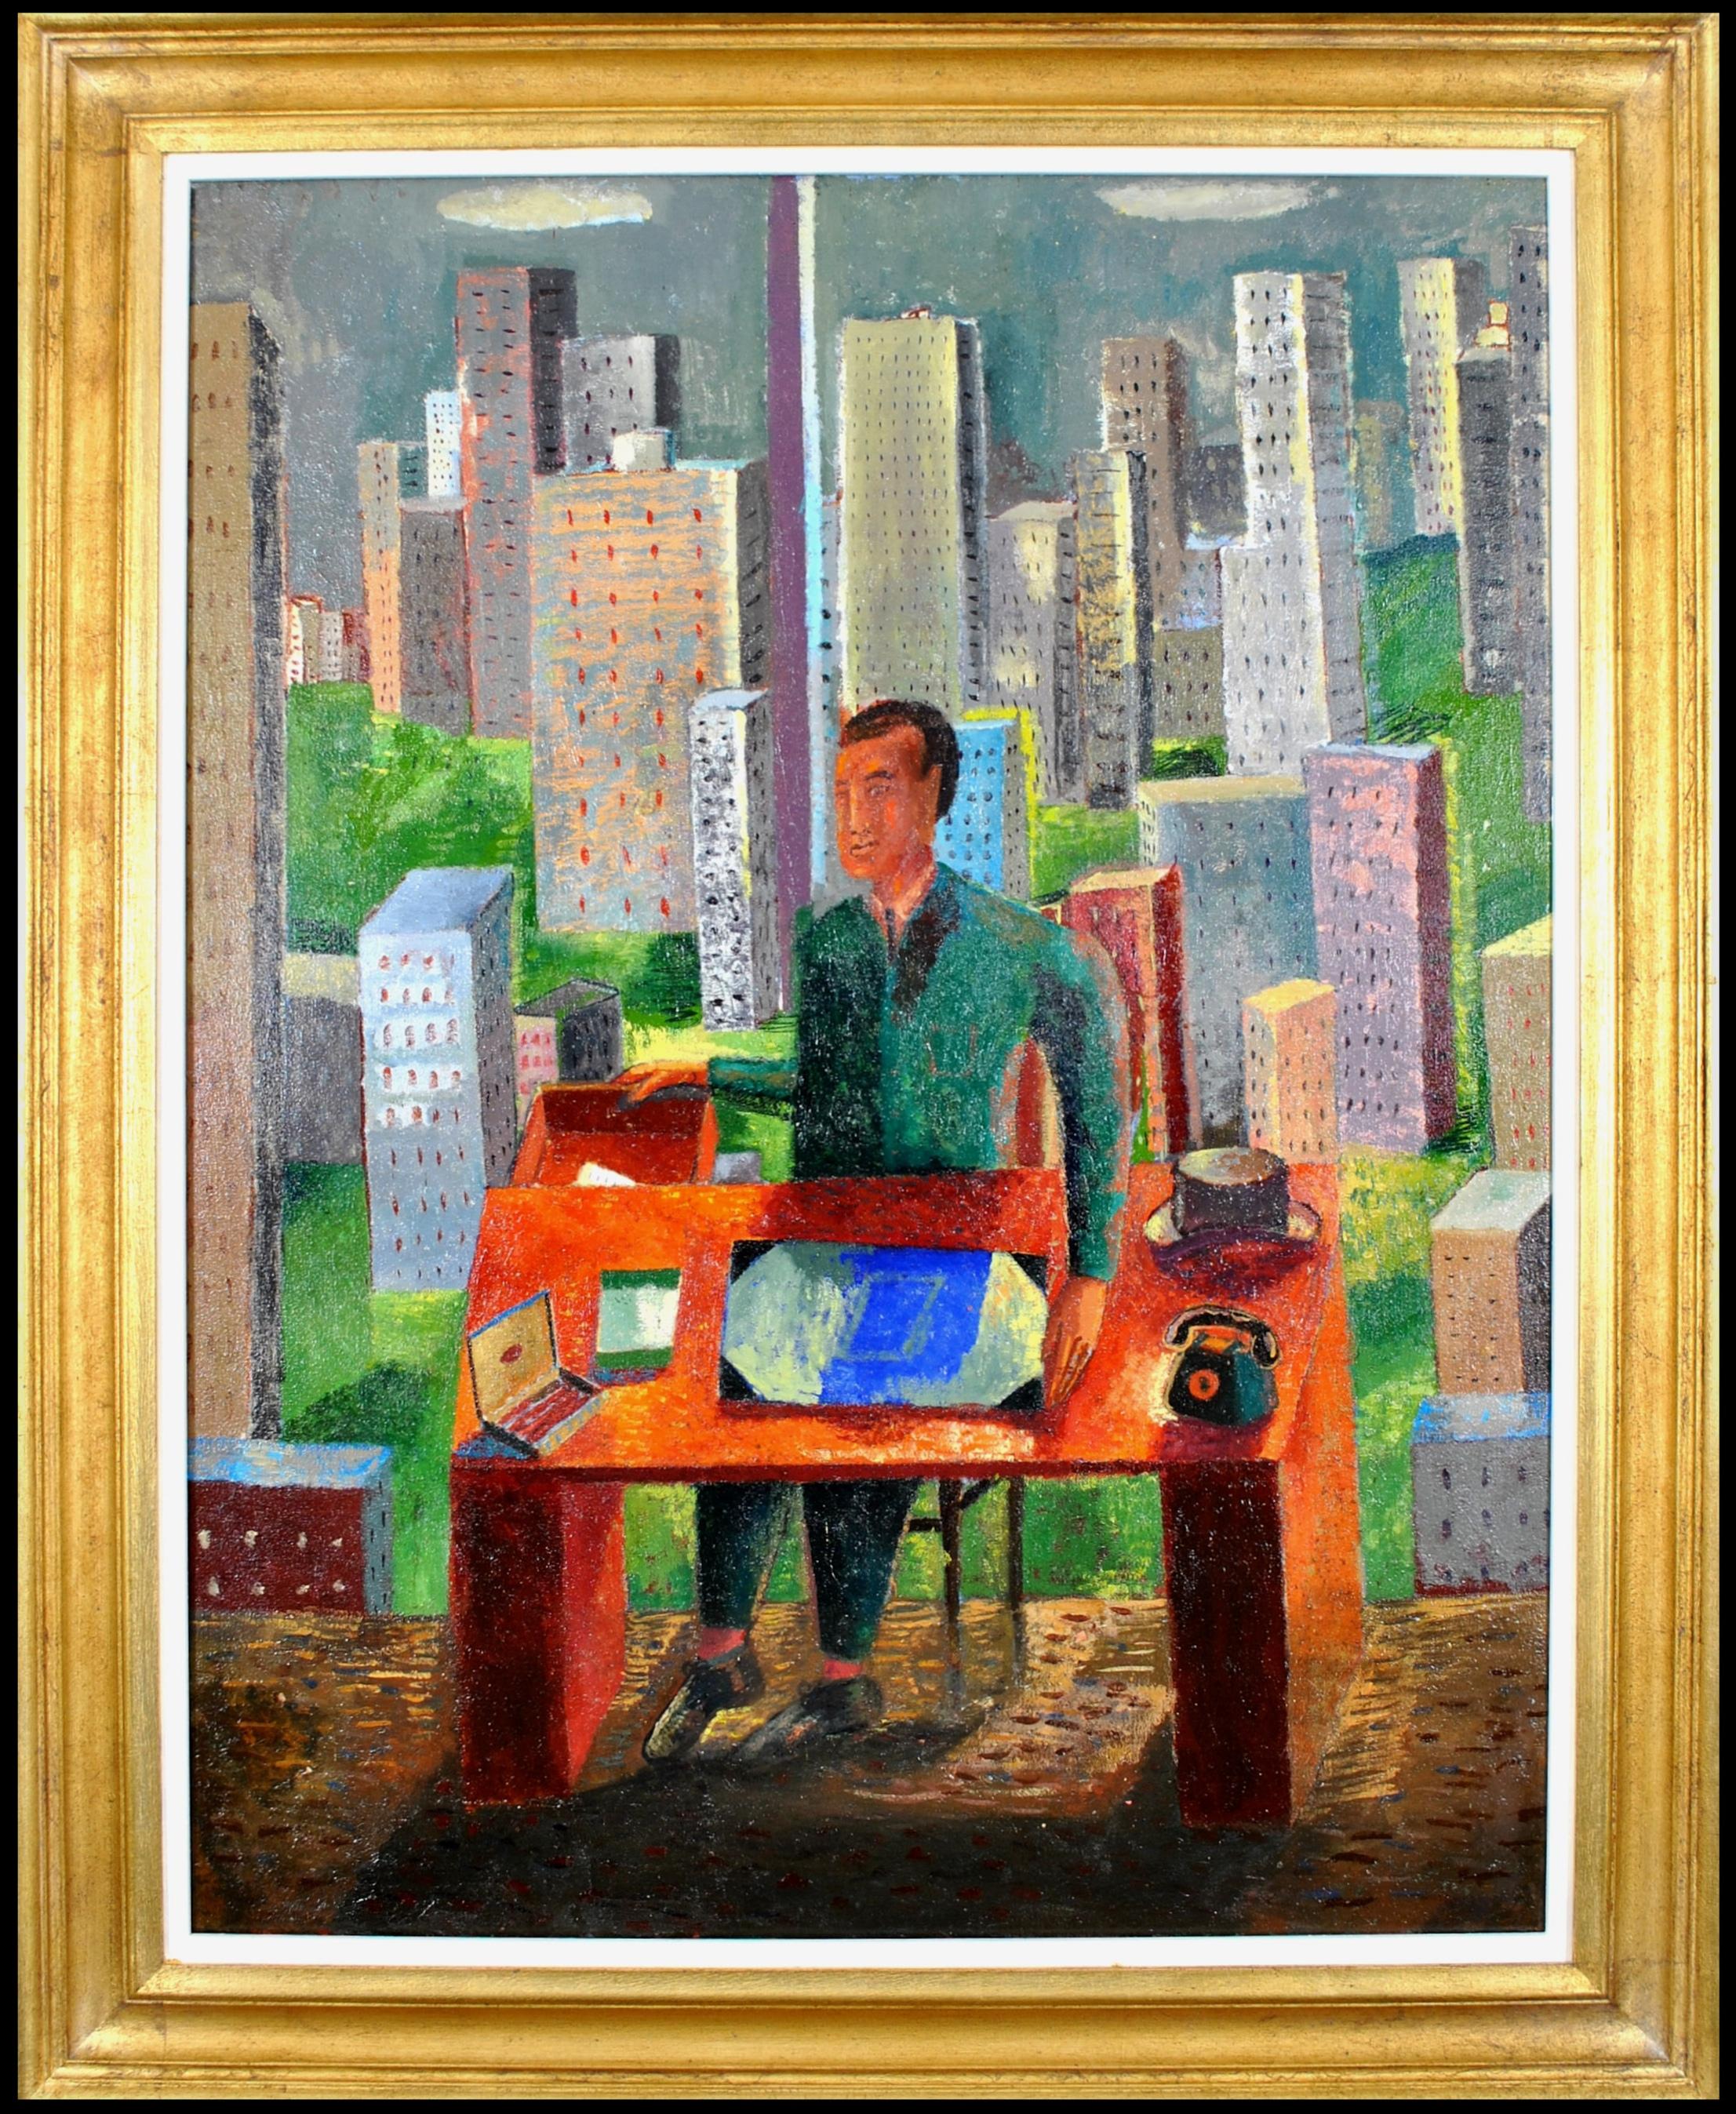 Myself as a Big Boss in New York - Large Figurative Portrait Oil Painting